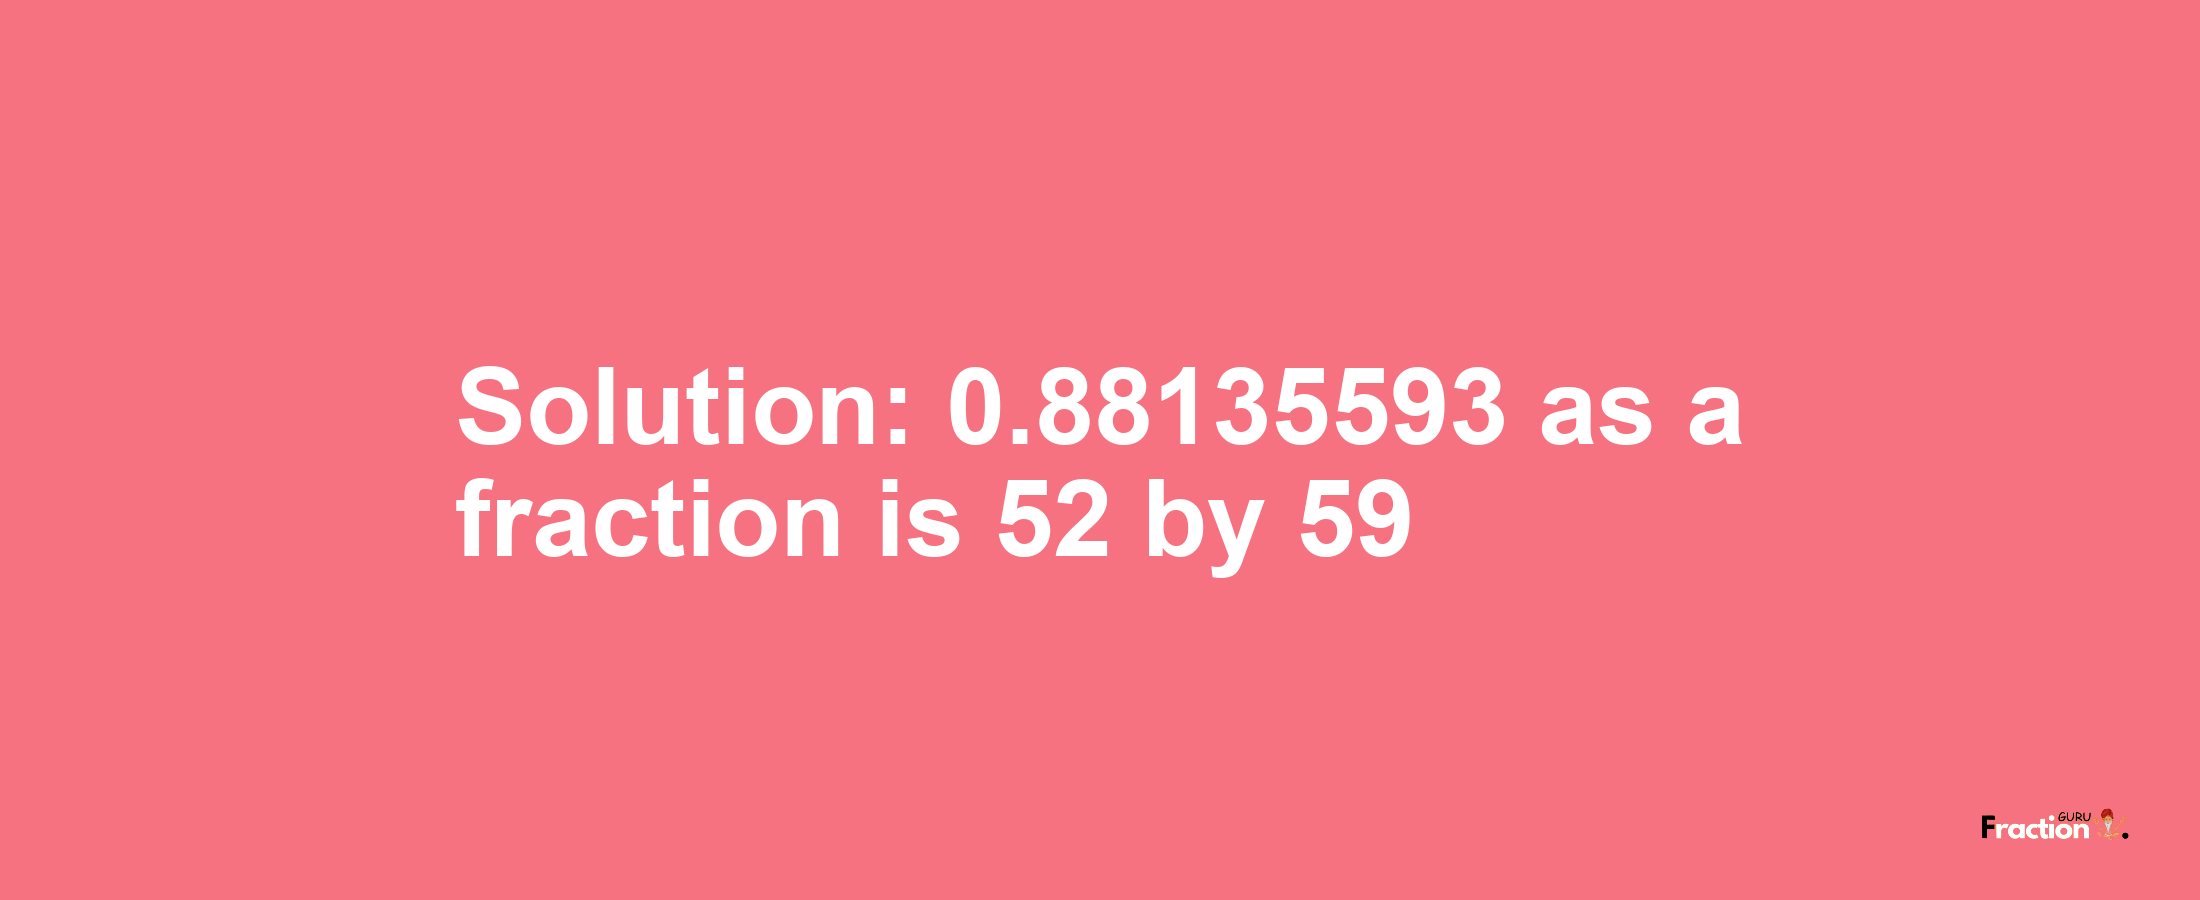 Solution:0.88135593 as a fraction is 52/59